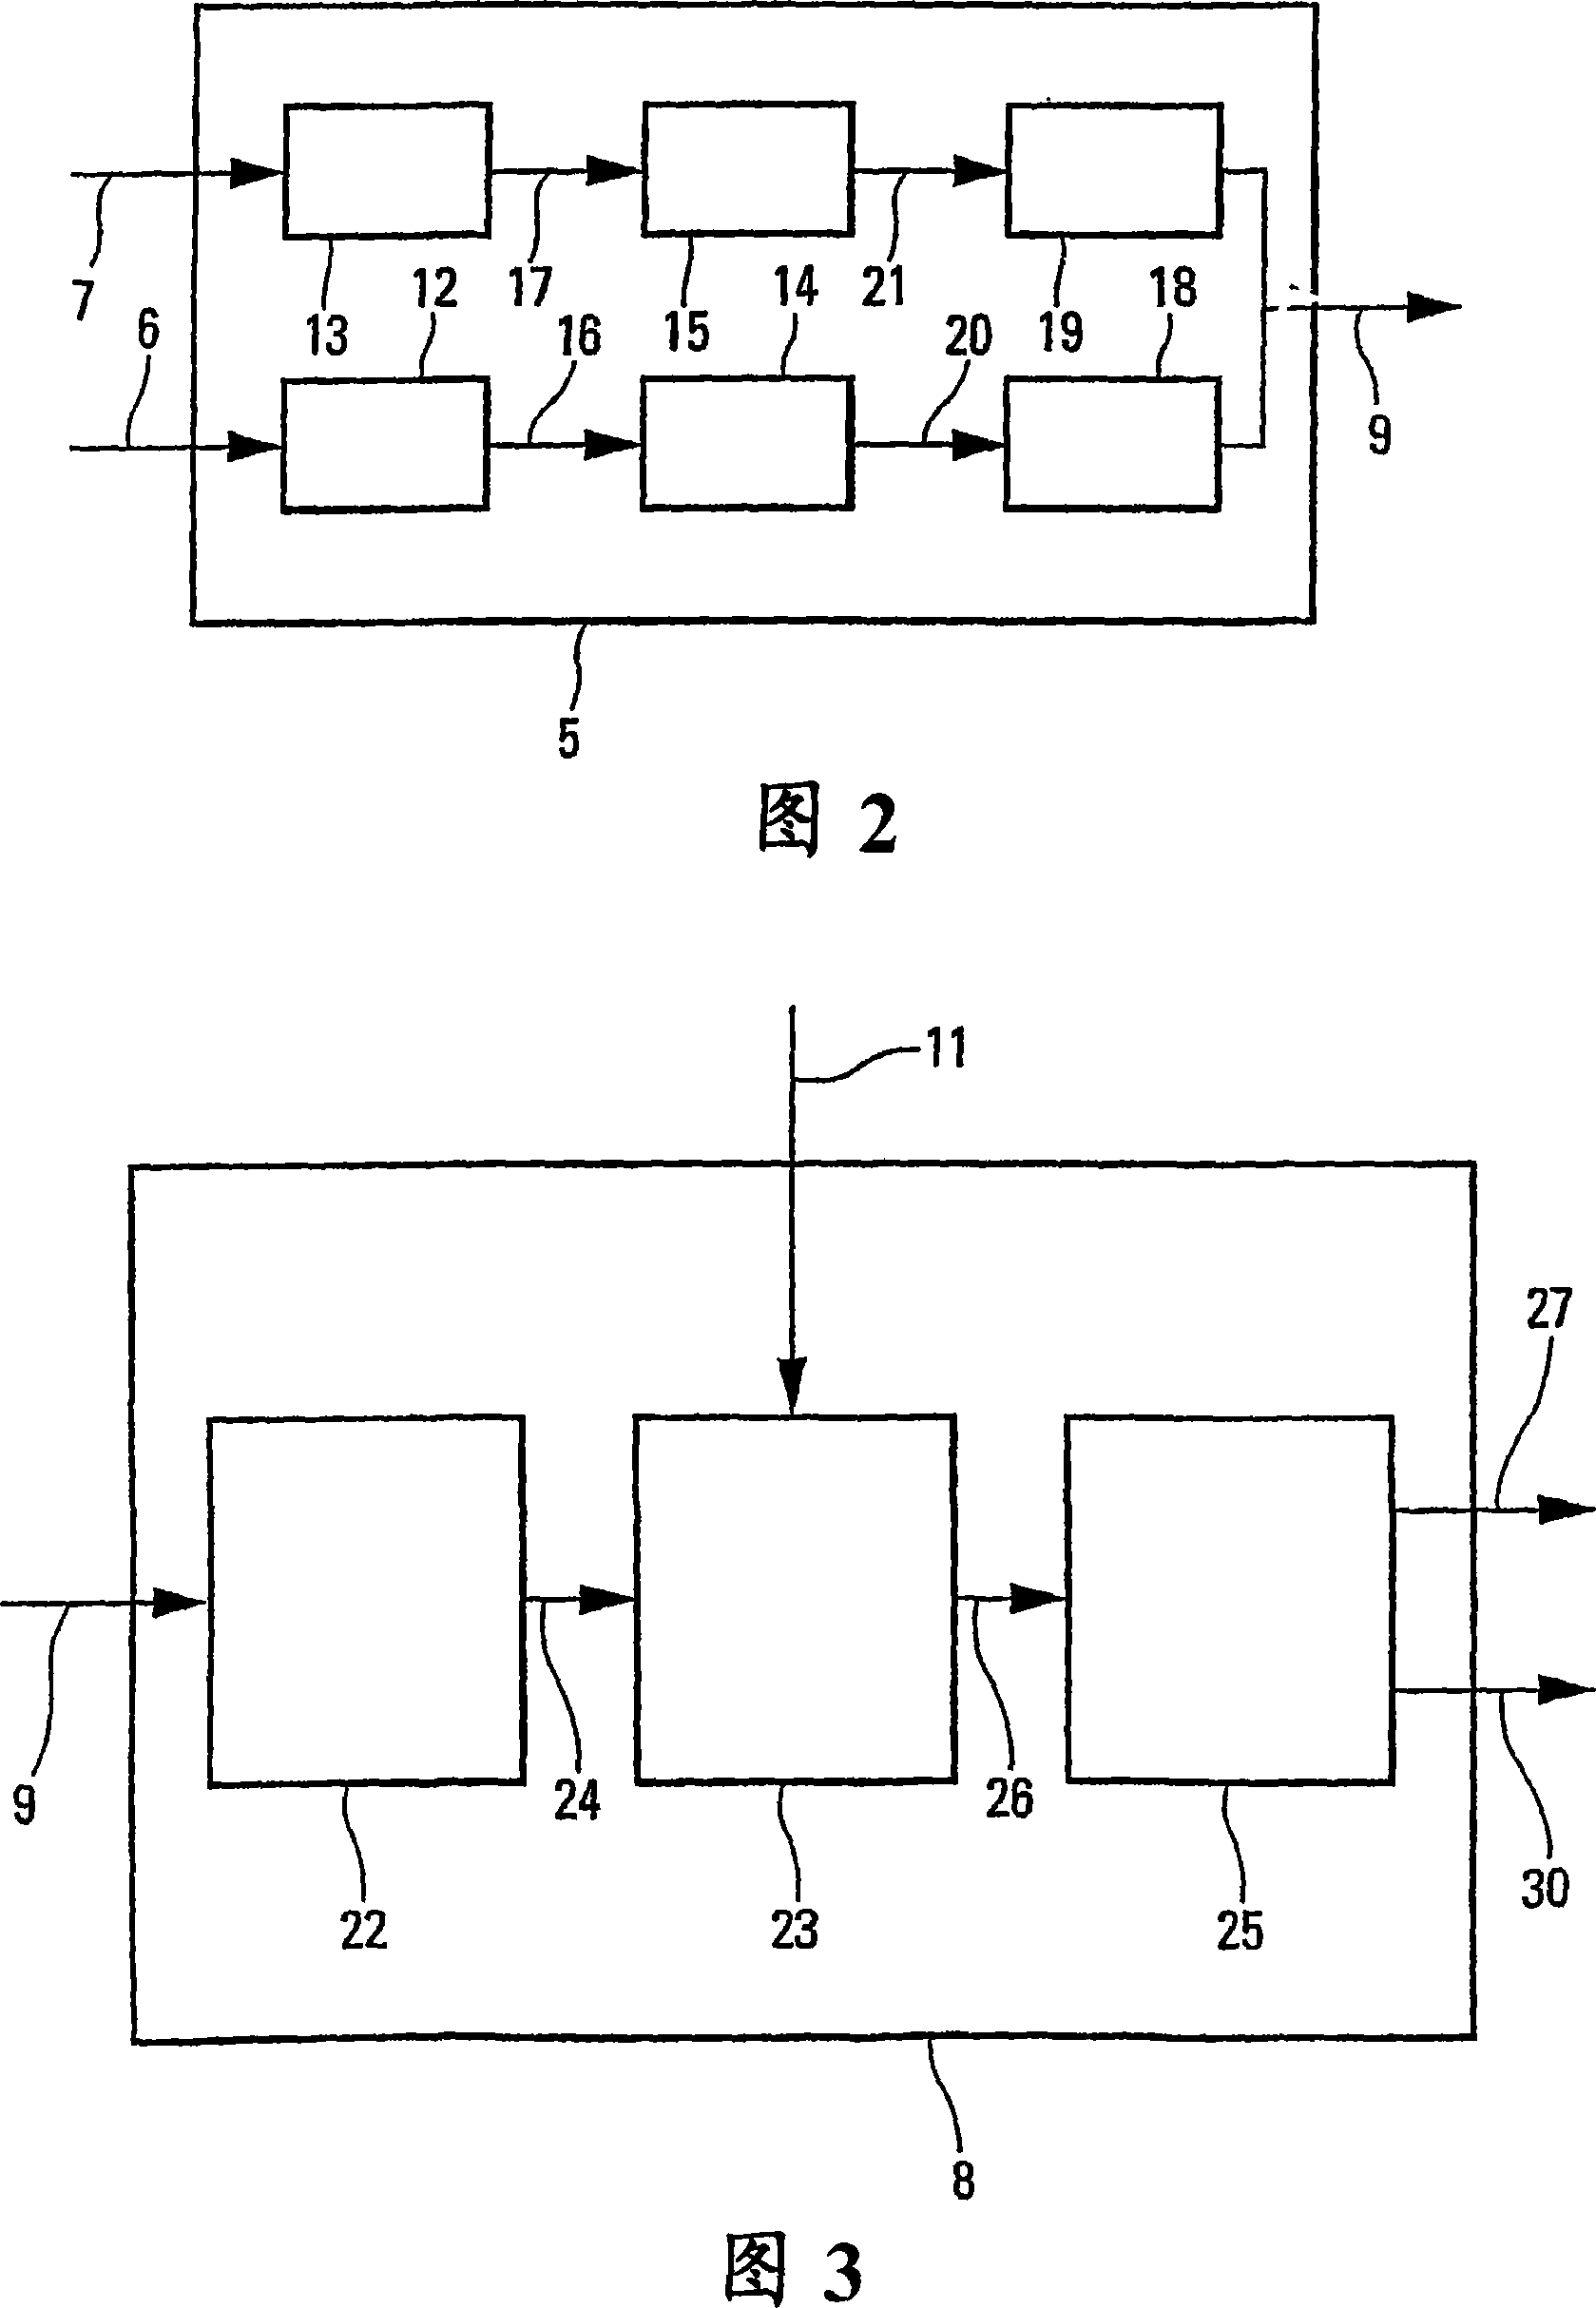 Method and device for detecting electric arc phenomenon on at least one electric cable